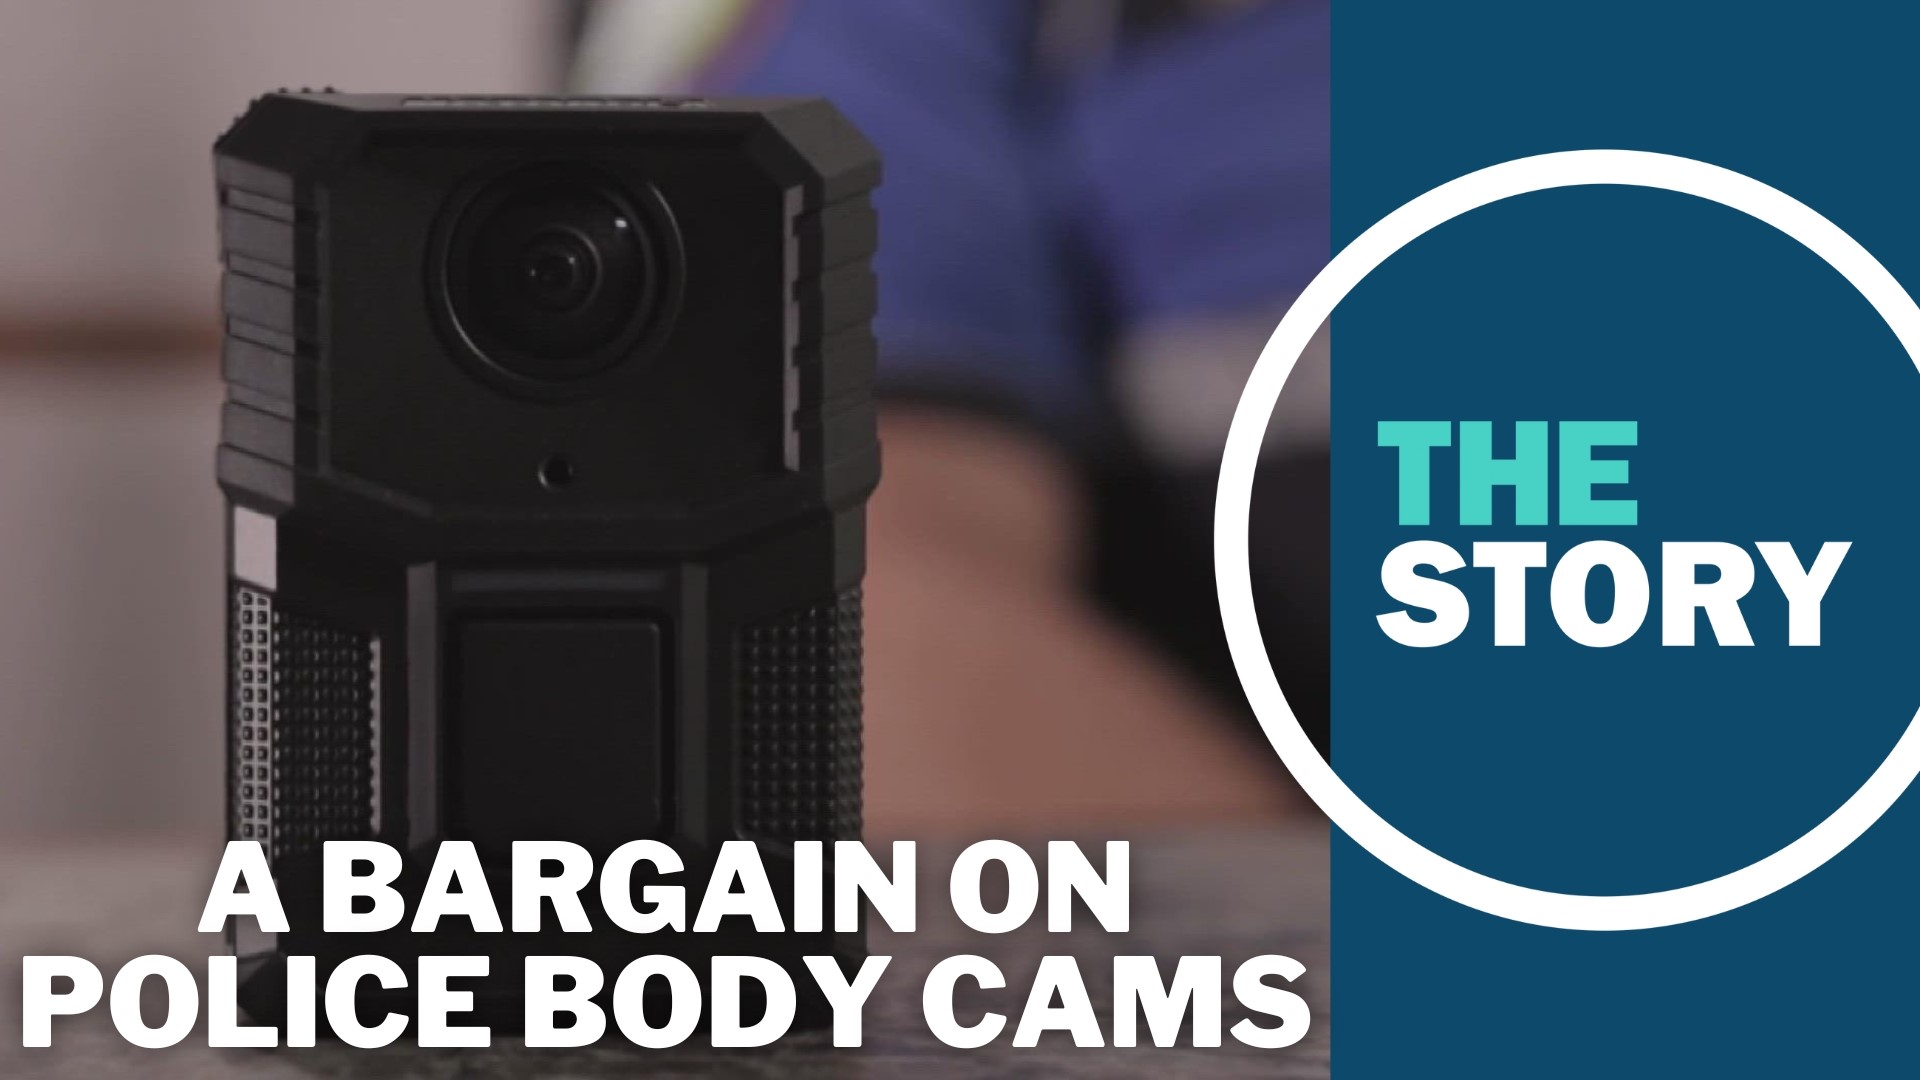 The impasse on body-worn cameras sprang from disagreement on whether officers should be able to view video before writing reports in use-of-force cases.